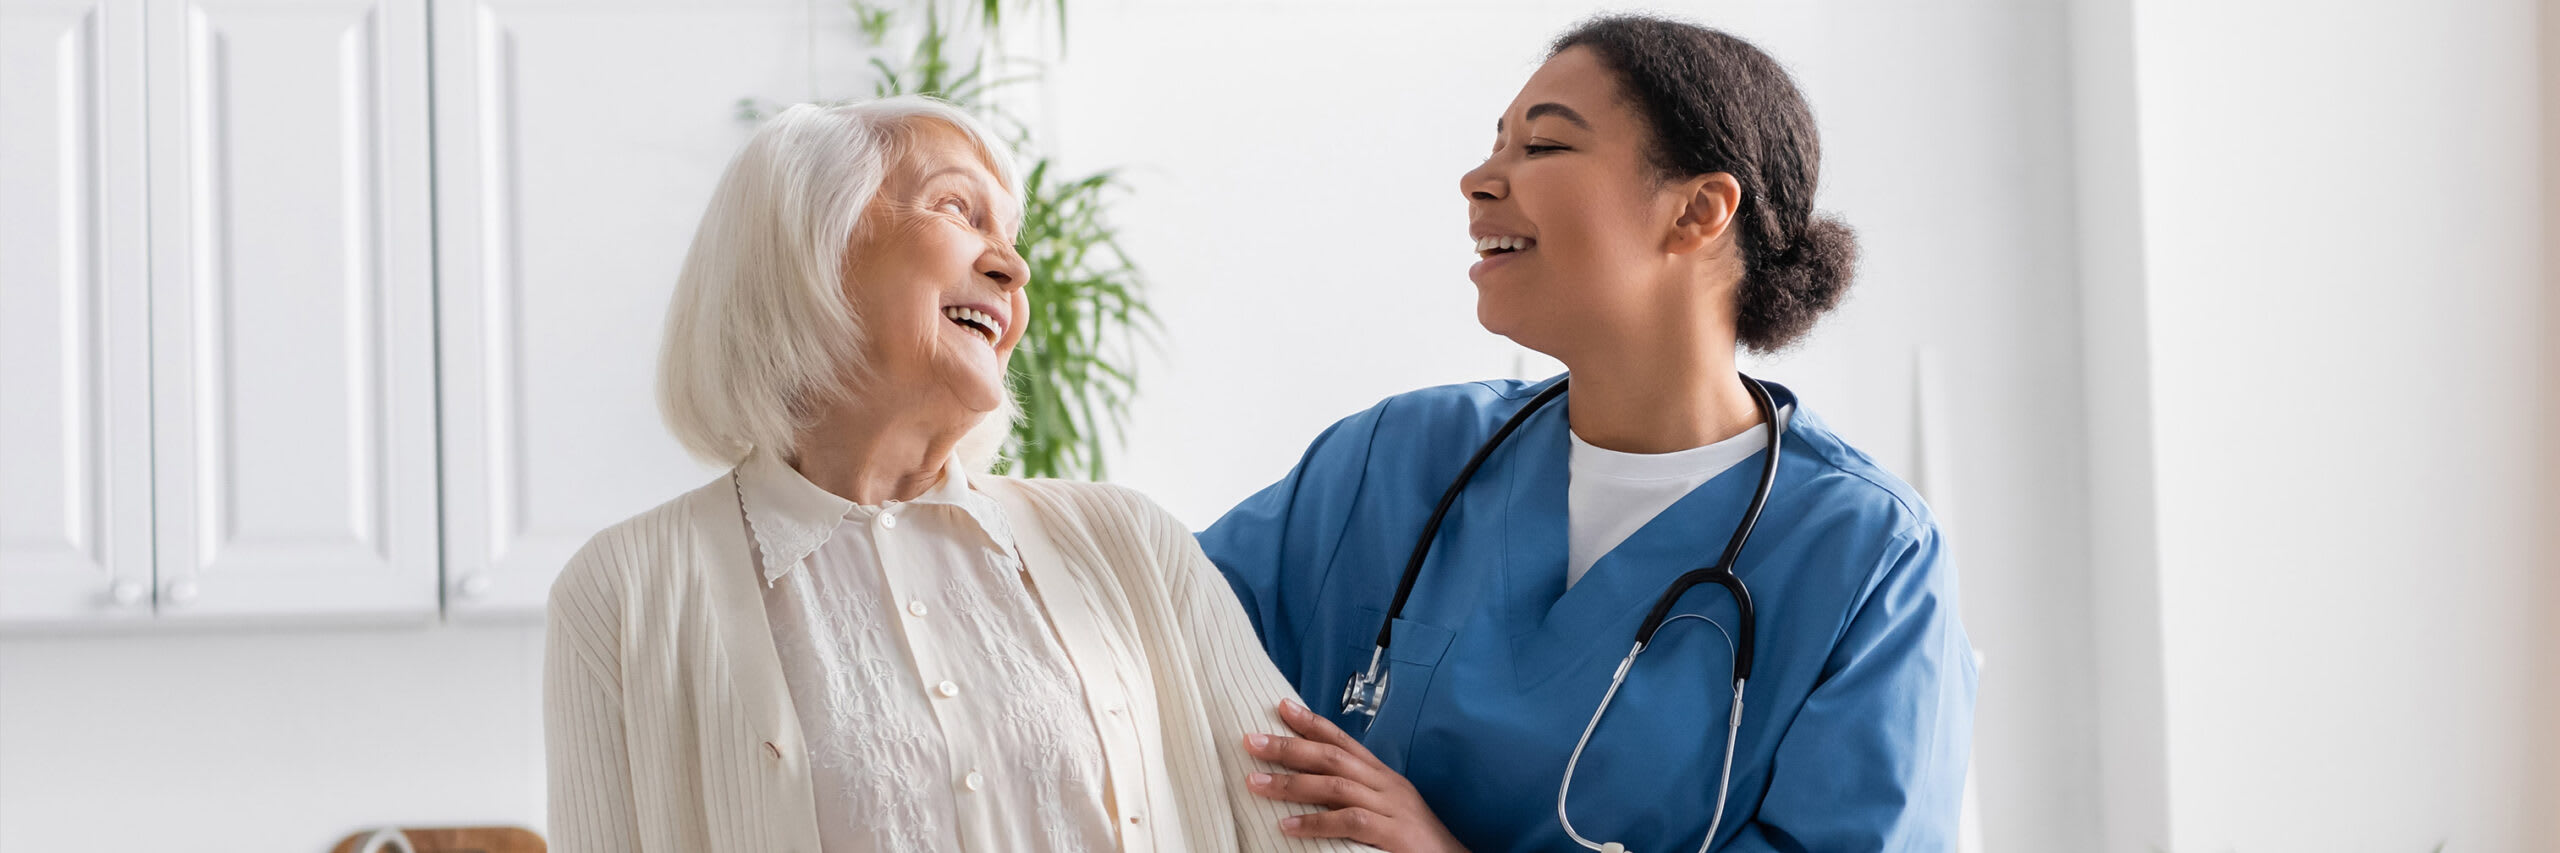 A caregiver smiling while in conversation with a senior